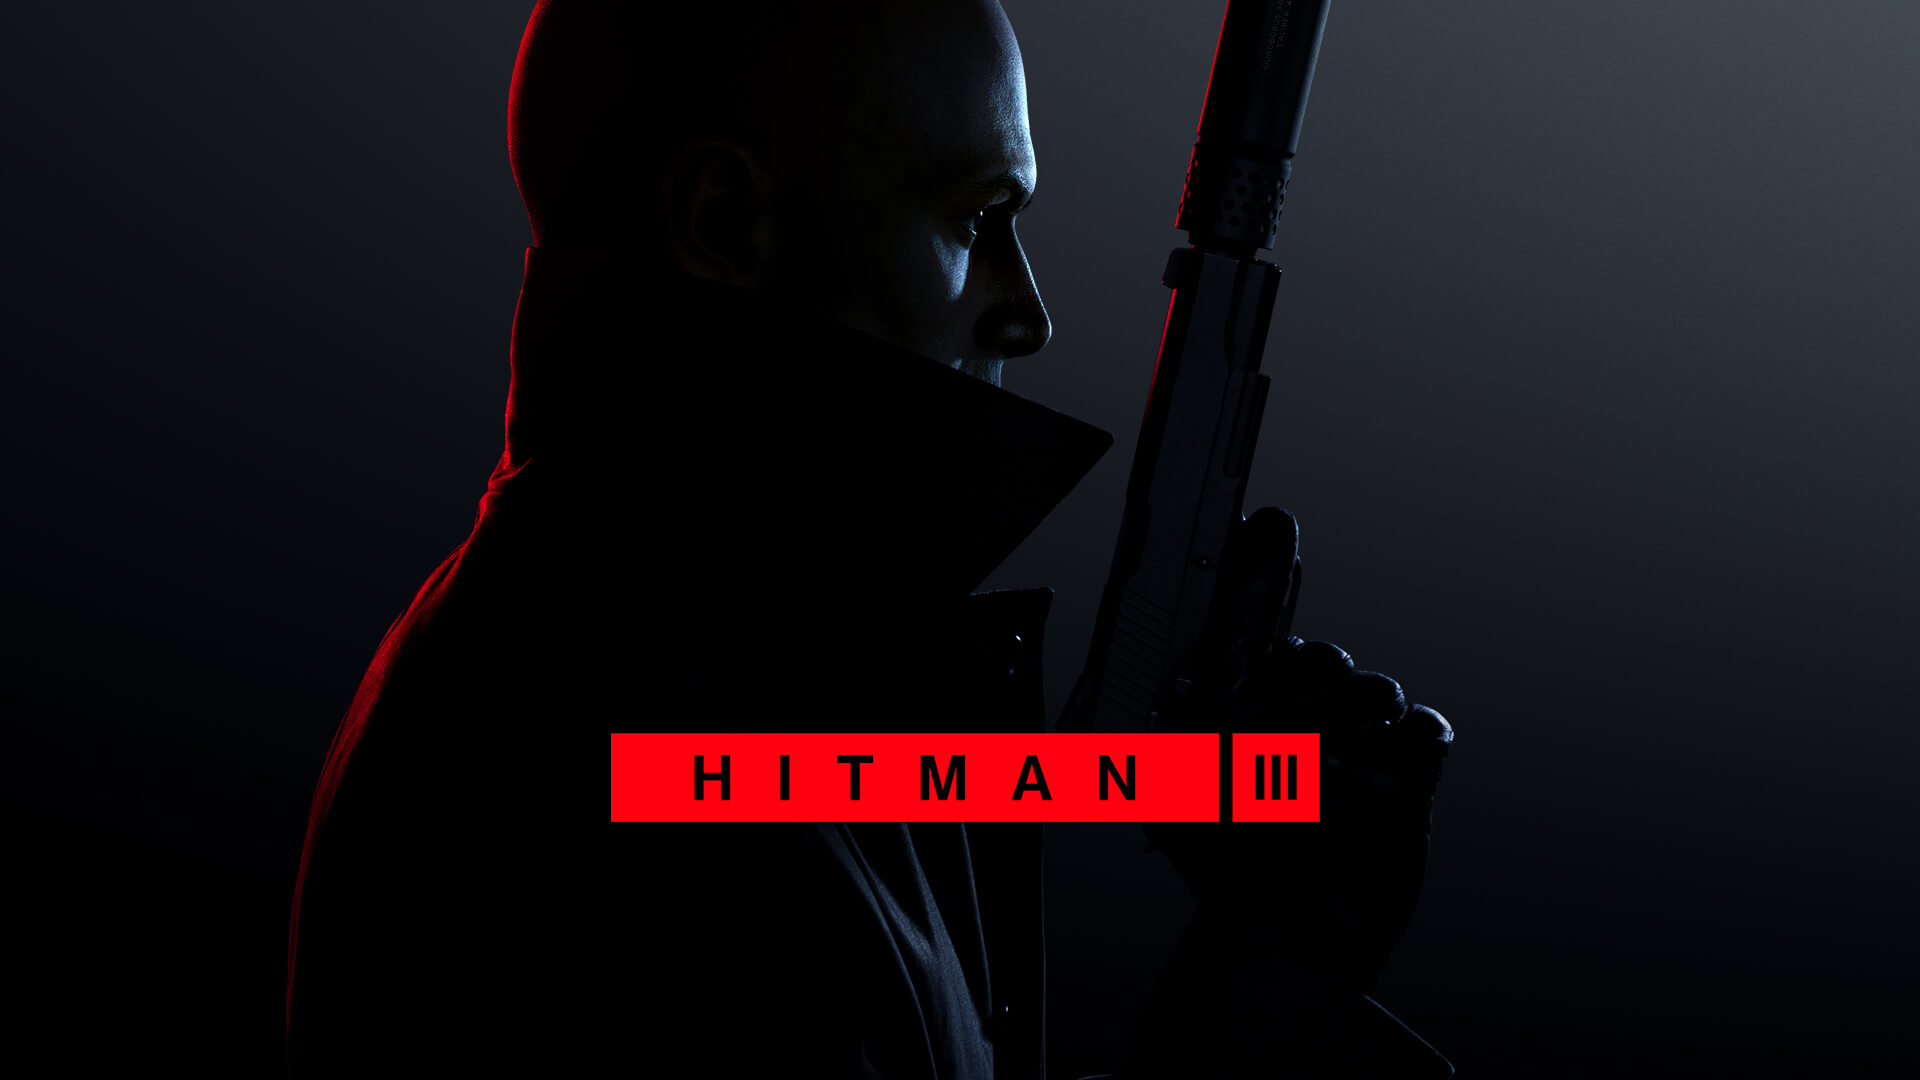 This Hitman 3 Mod allows you to play the game in firstperson mode